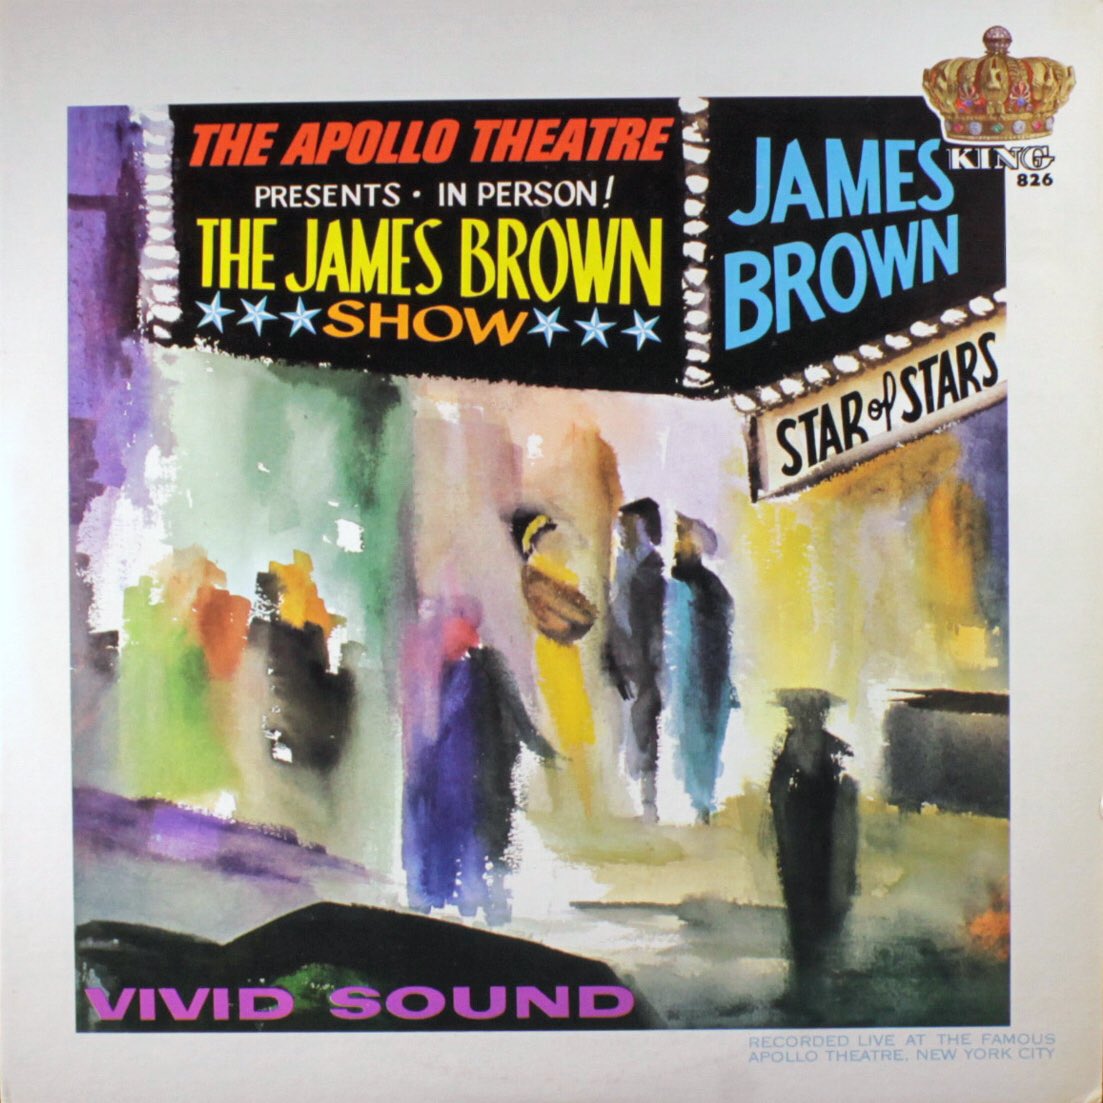 40. James Brown - ‘Live' at the Apollo (1963)Genres: Soul, Rhythm & BluesRating: ★★★½ Note: I’m not sure who shrieked more, James or his adoring fans!